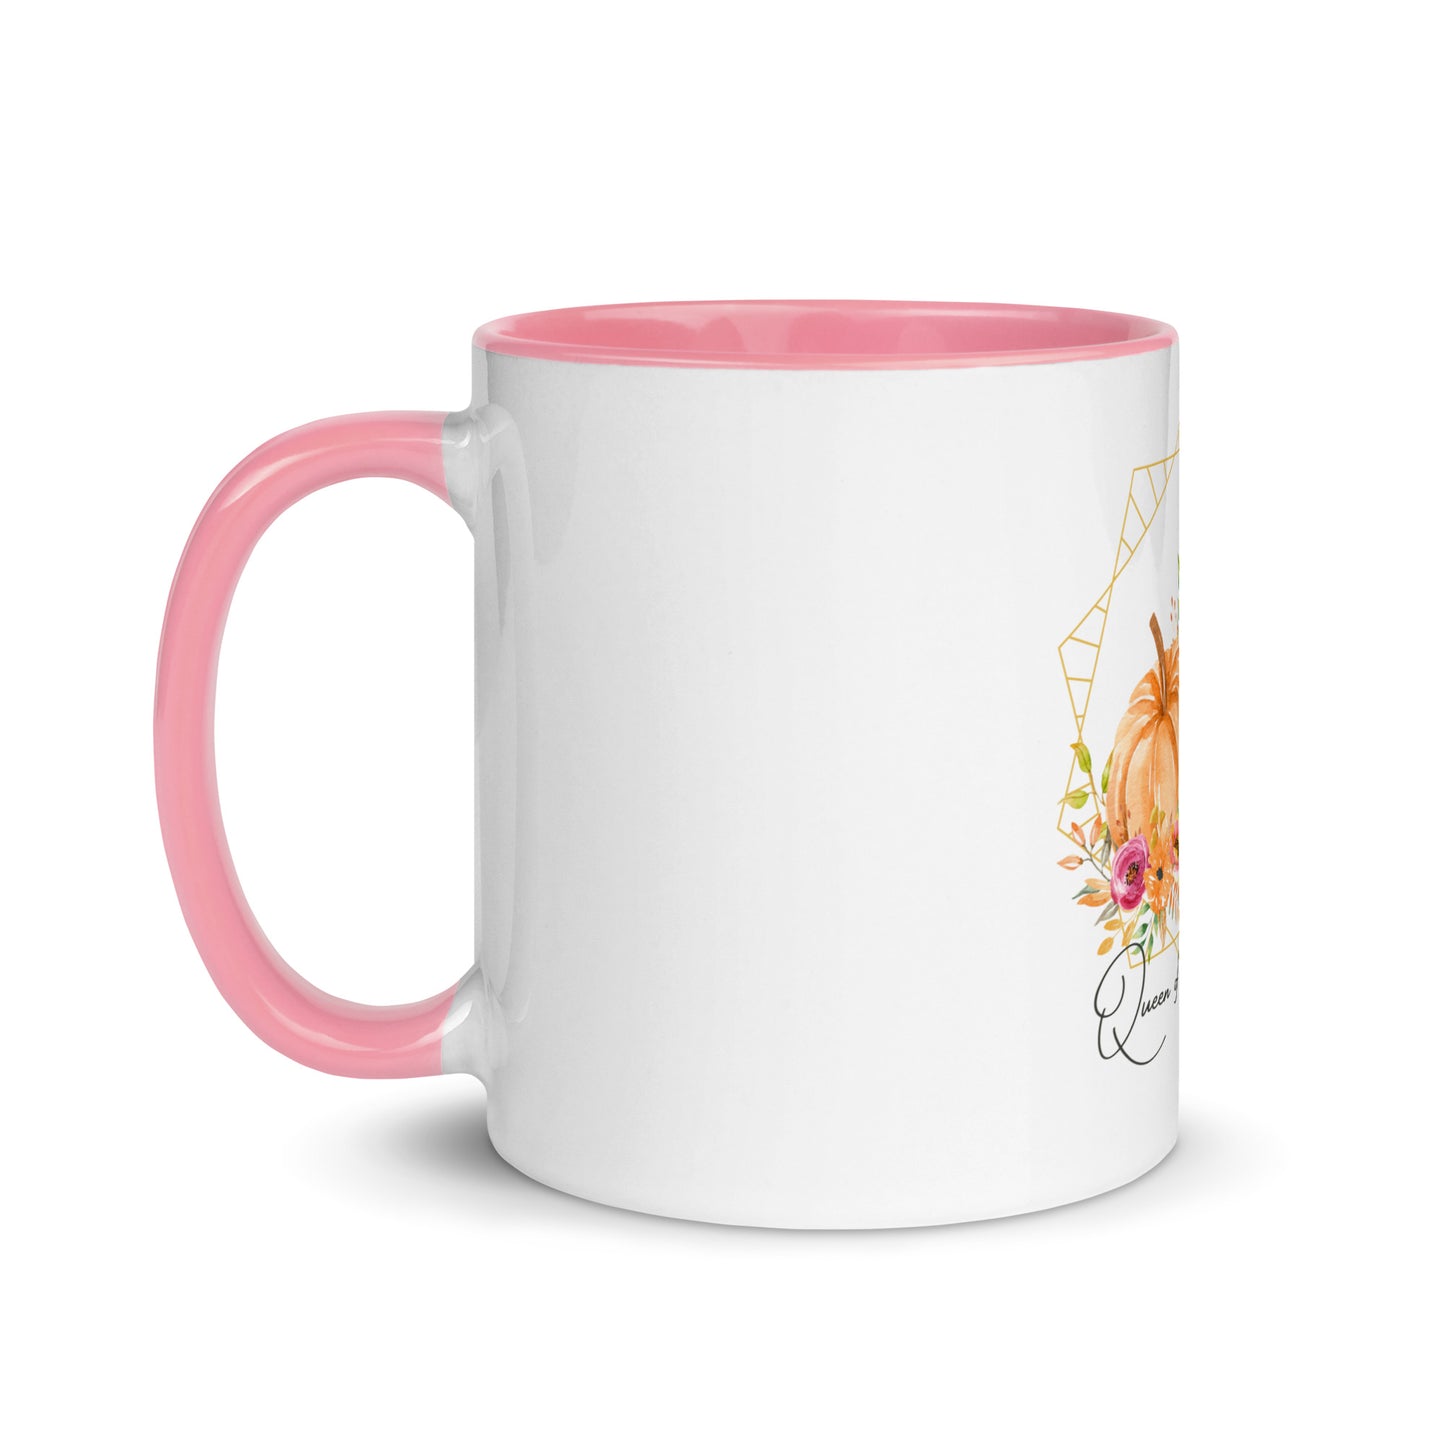 Queen of the Harvest | Mug with Color Inside